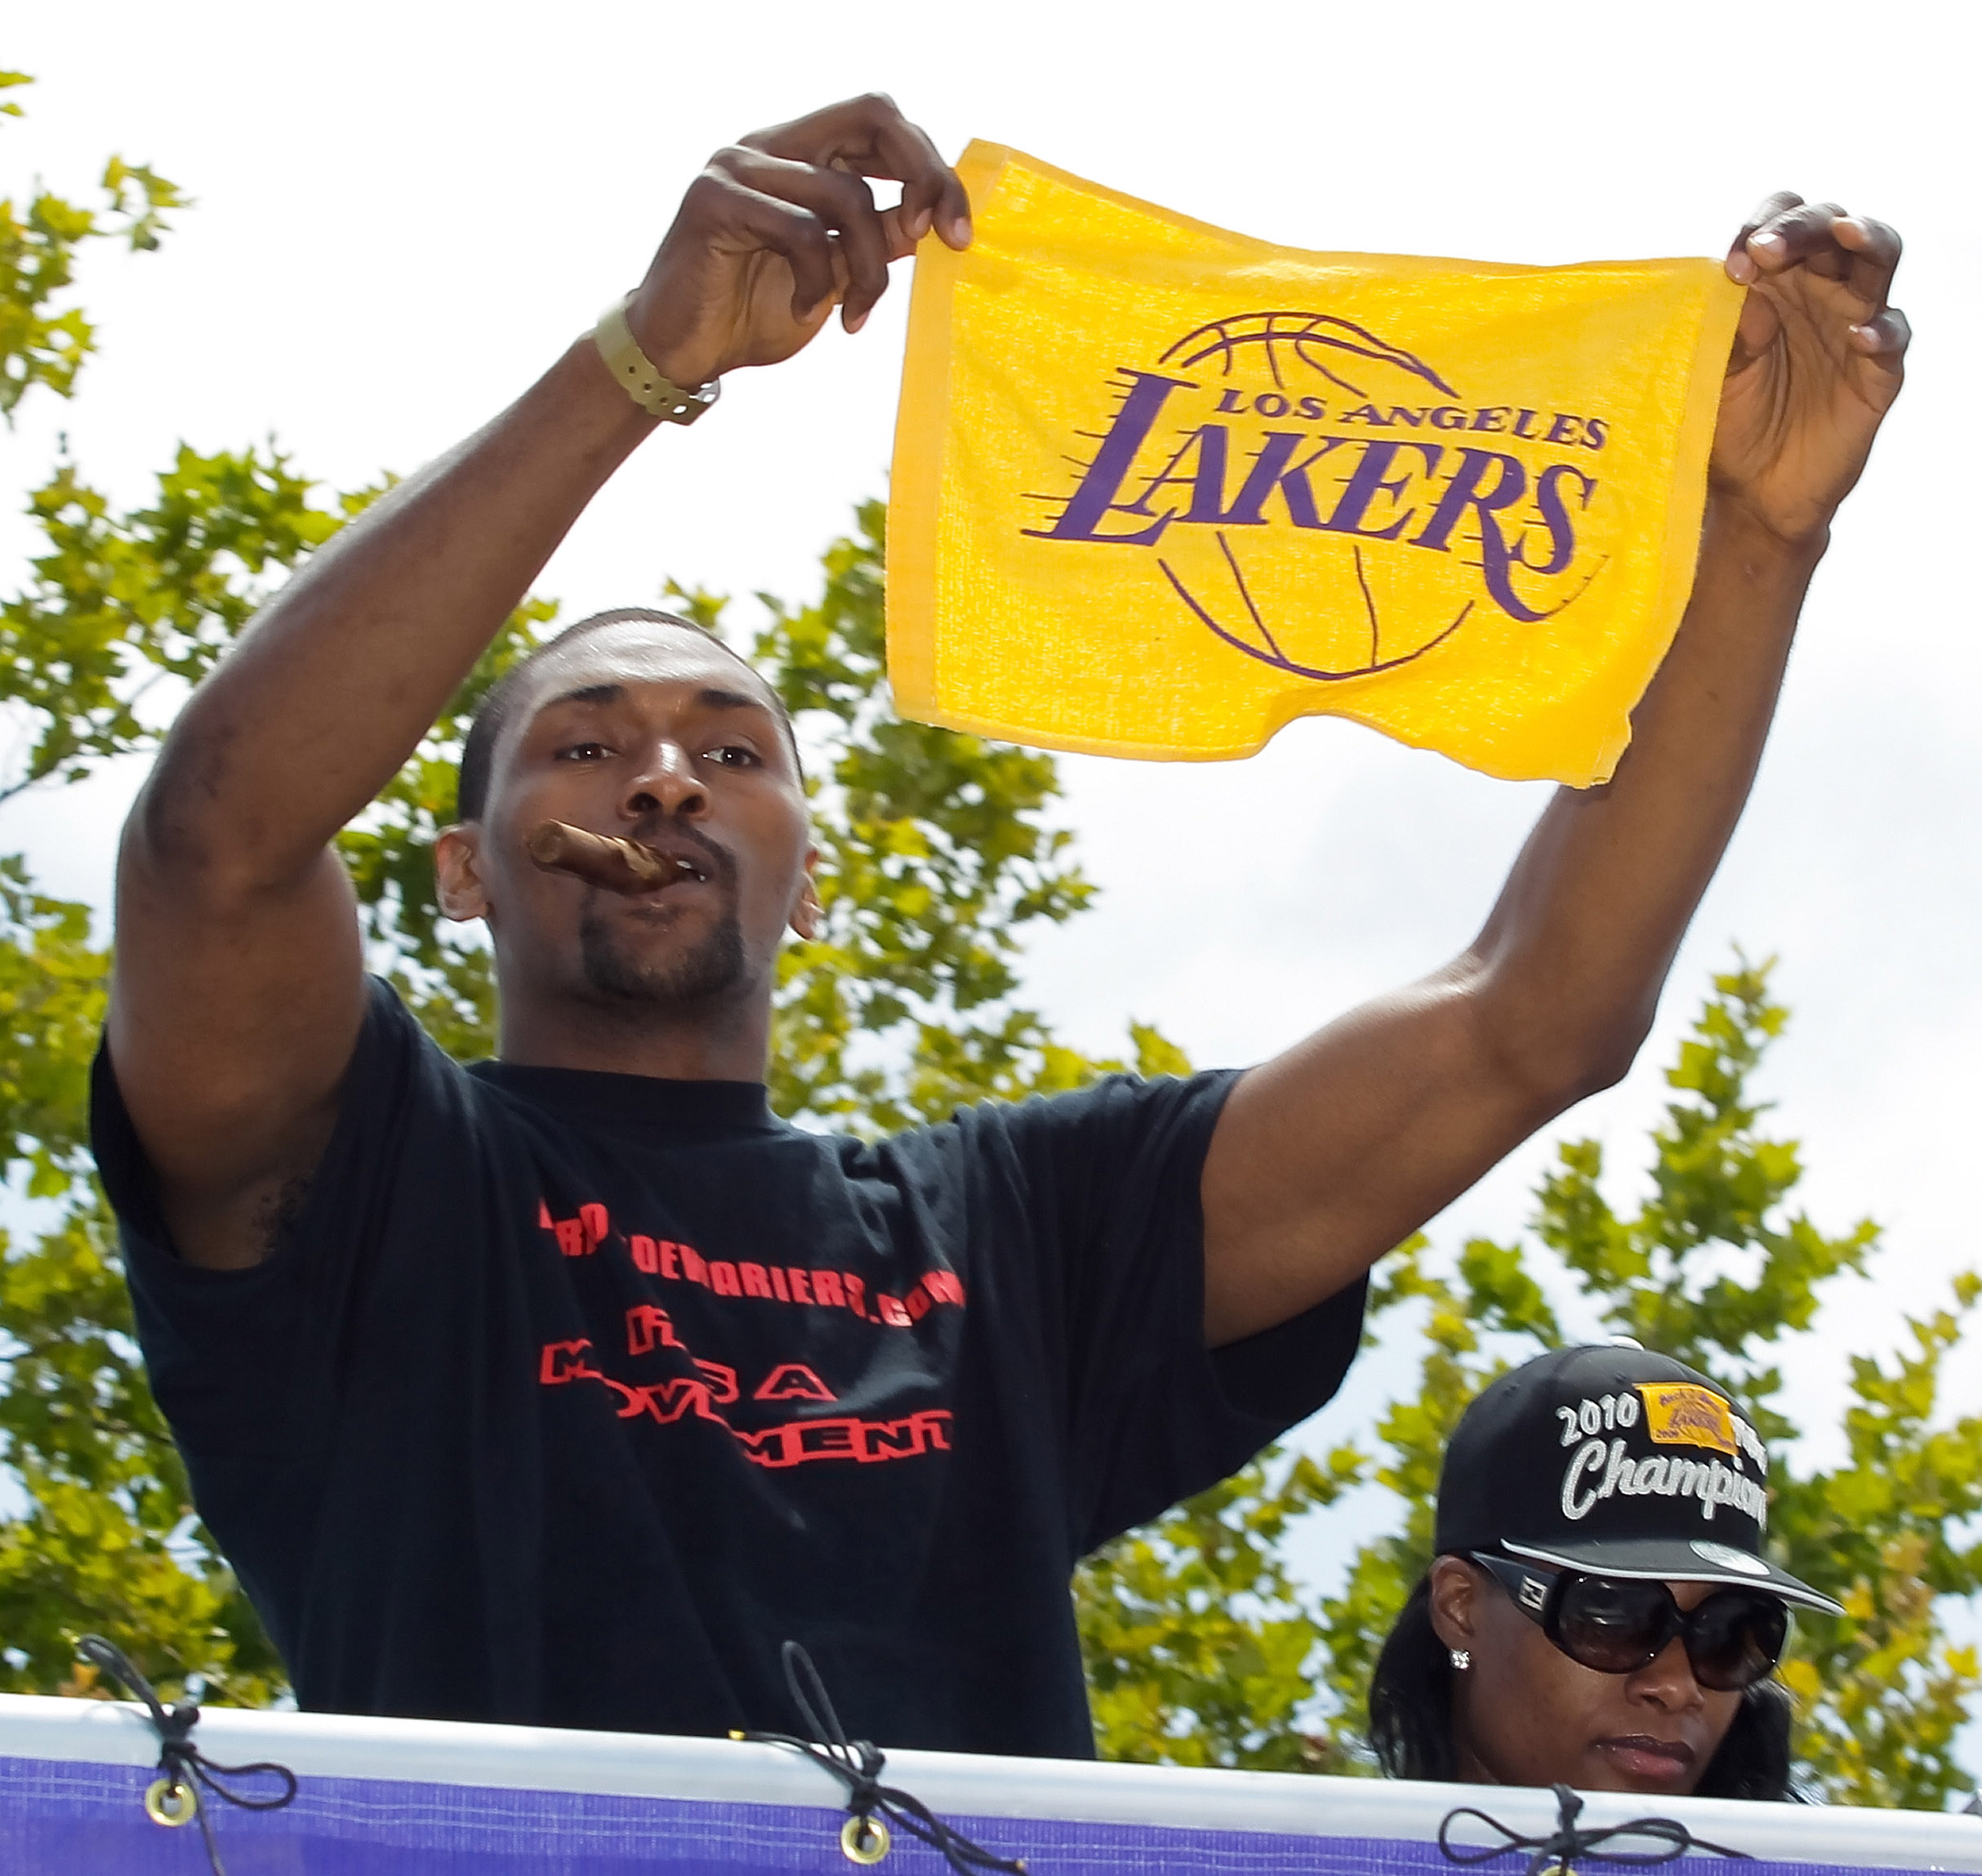 LOS ANGELES, CA - JUNE 21:  Los Angeles Lakers small forward Ron Artest salutes the crowd while riding in the victory parade for the the NBA basketball champion team on June 21, 2010 in Los Angeles, California. The Lakers beat the Boston Celtics 87-79 in